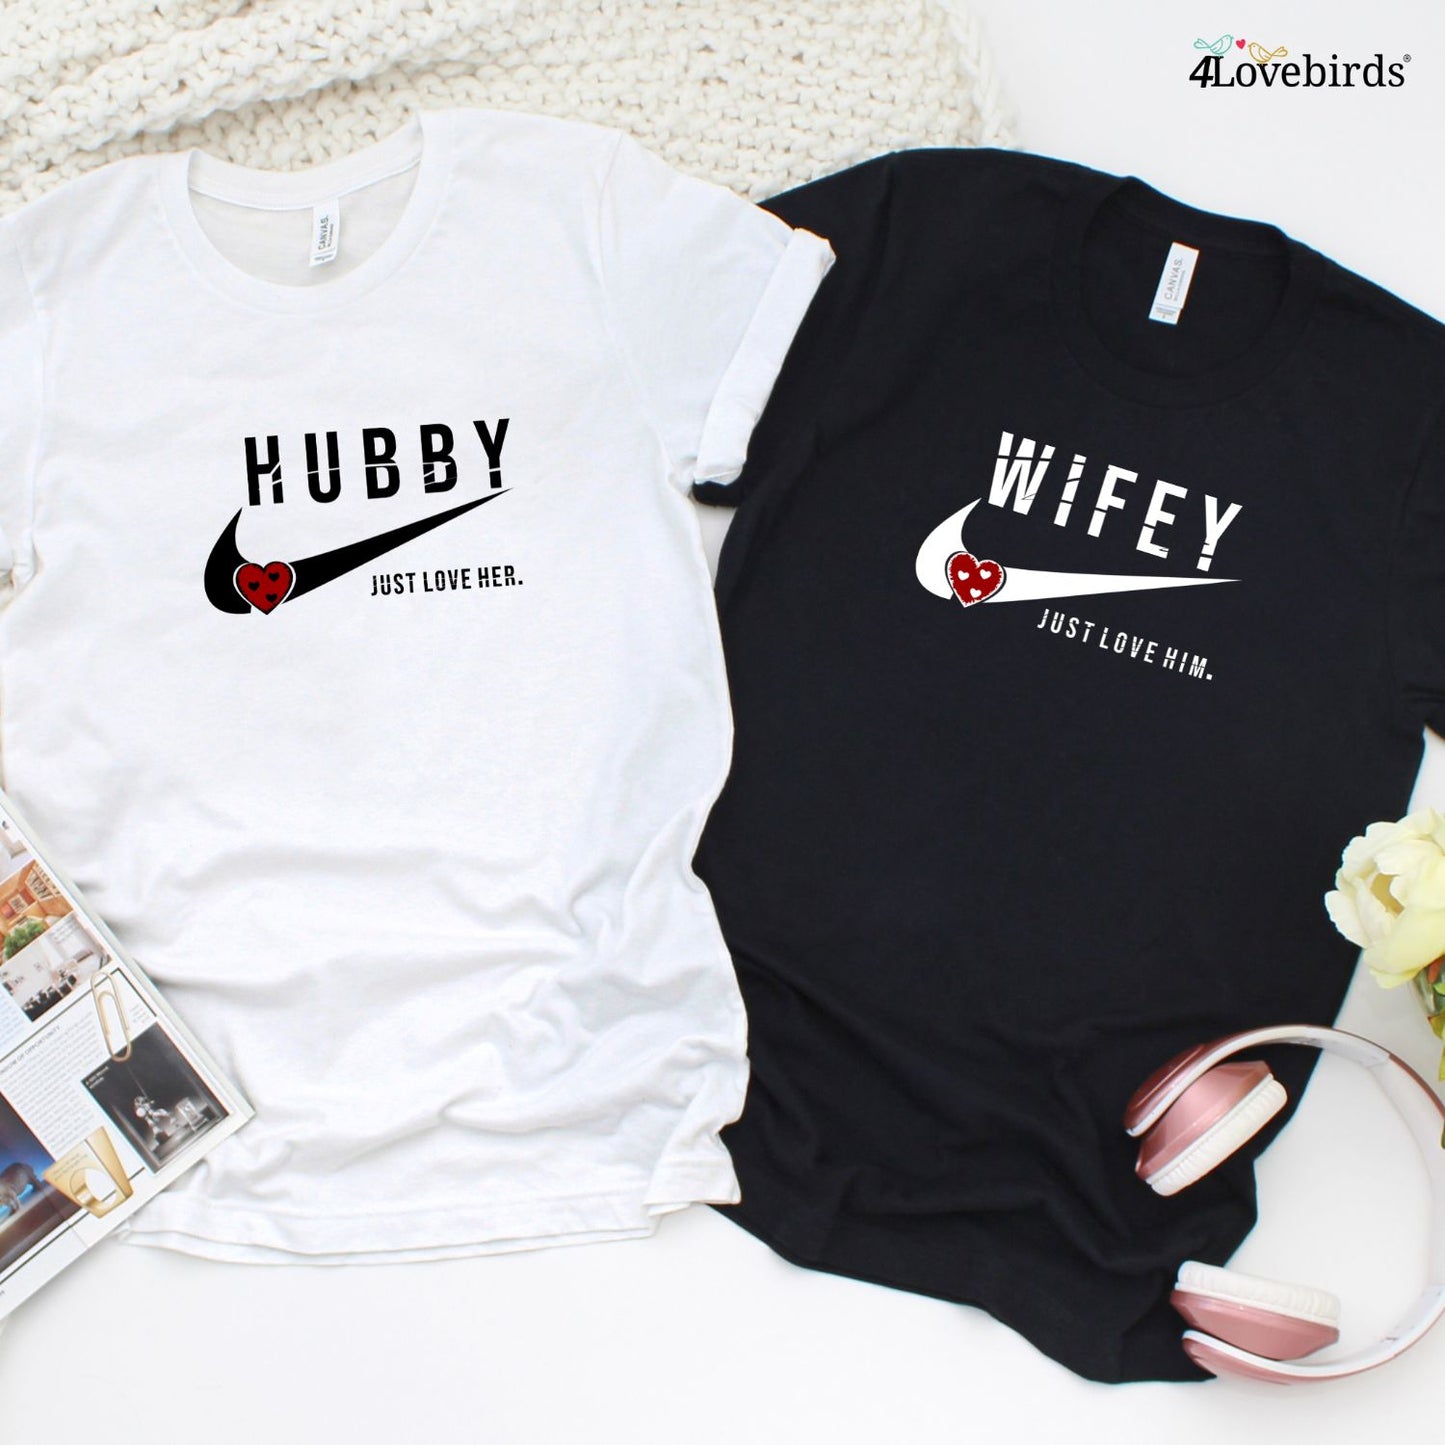 Hubby and Wifey Valentine's Day Love Him/Her Matching Set - Ideal Couples Gift